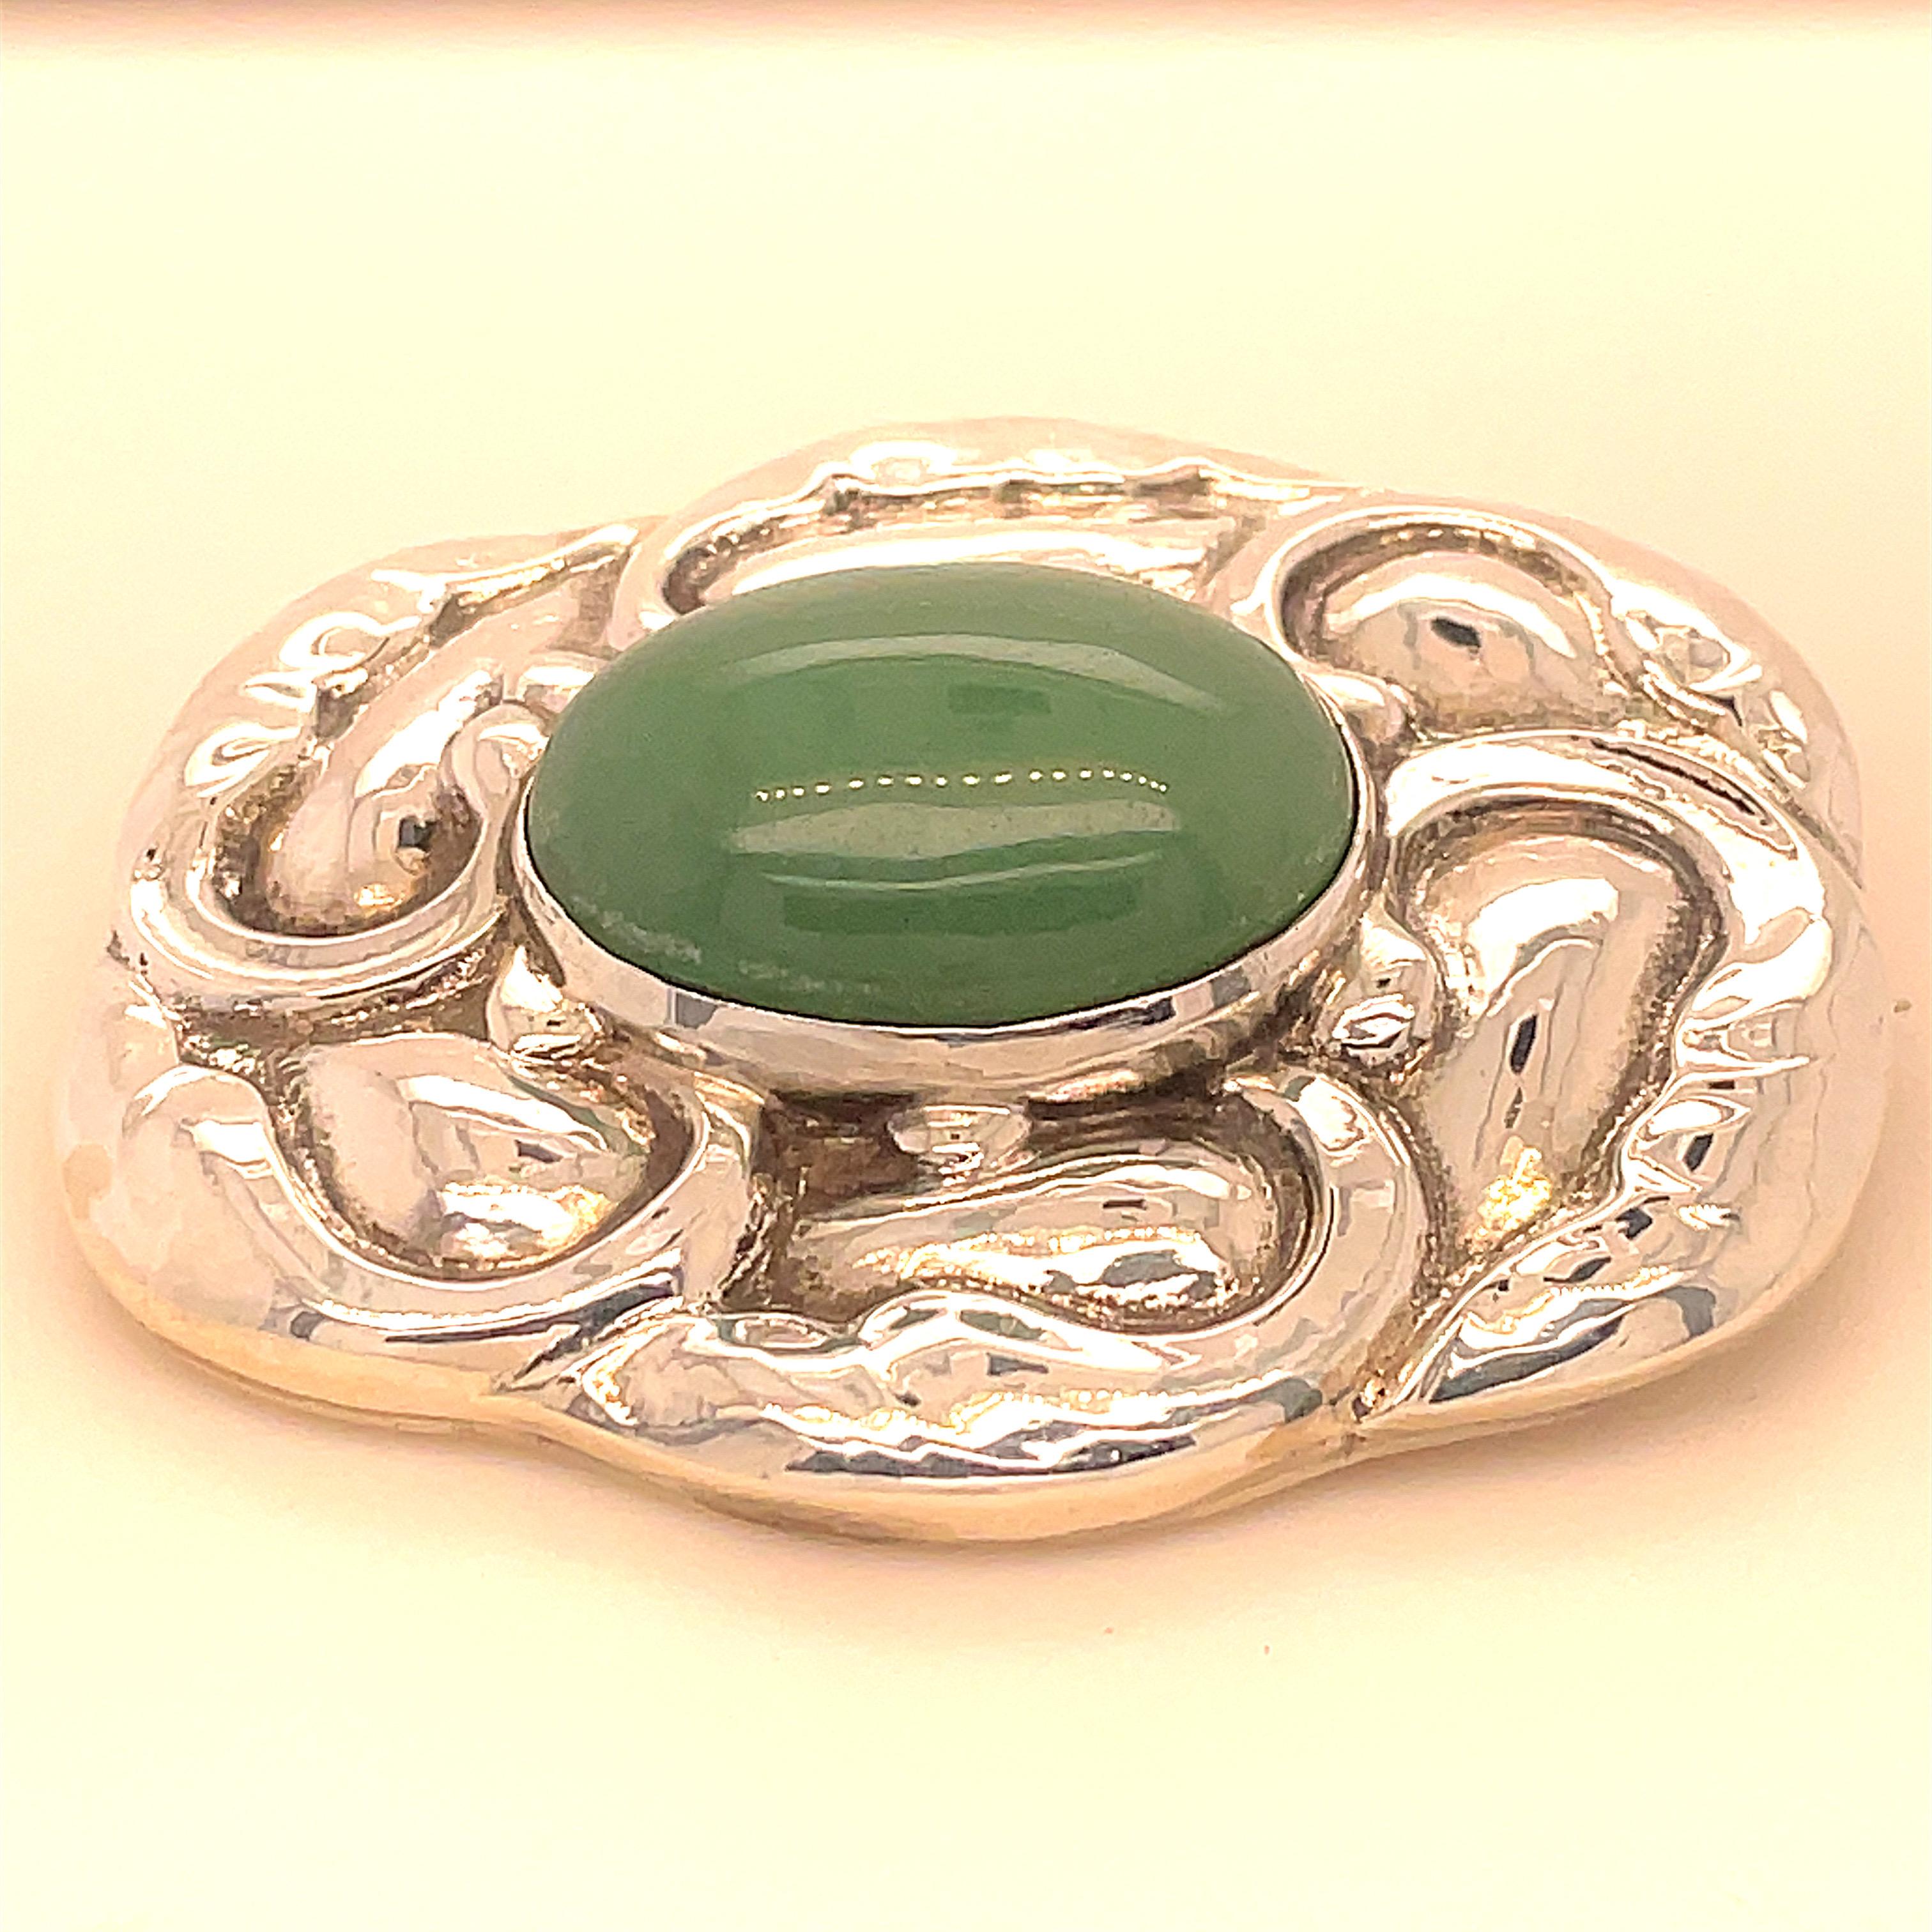 Large sterling silver pin.  Made and signed by GEORG JENSEN.  Rectangular with rounded corners.  With an applied puffy leafy border pattern.  In the center is a large cabochon chrysoprase.  2